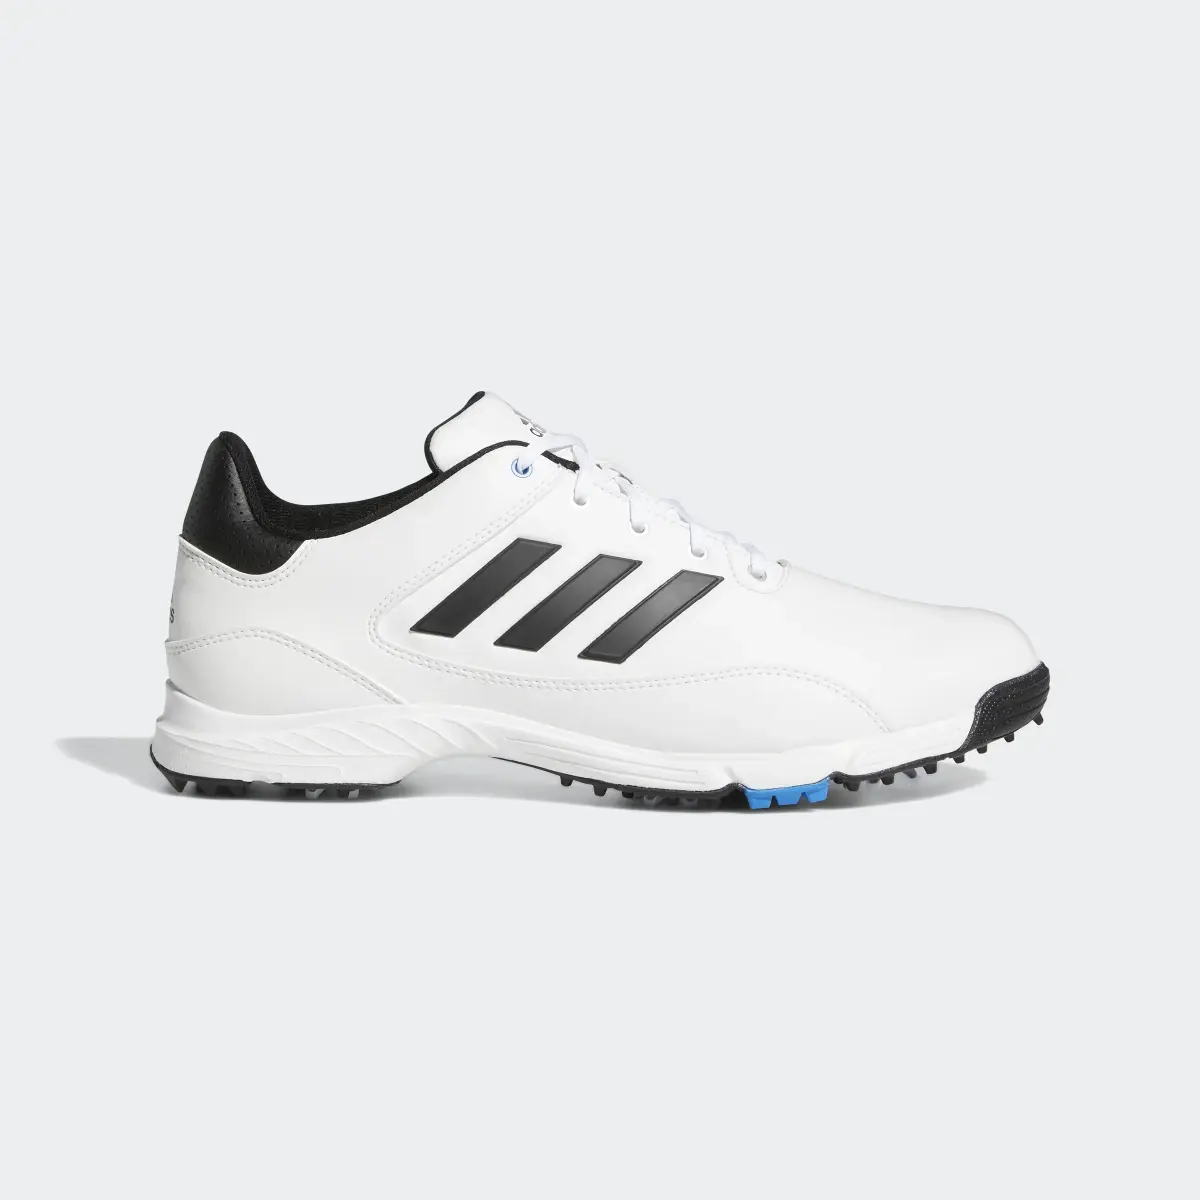 Adidas Golflite Max Wide Golf Shoes. 2